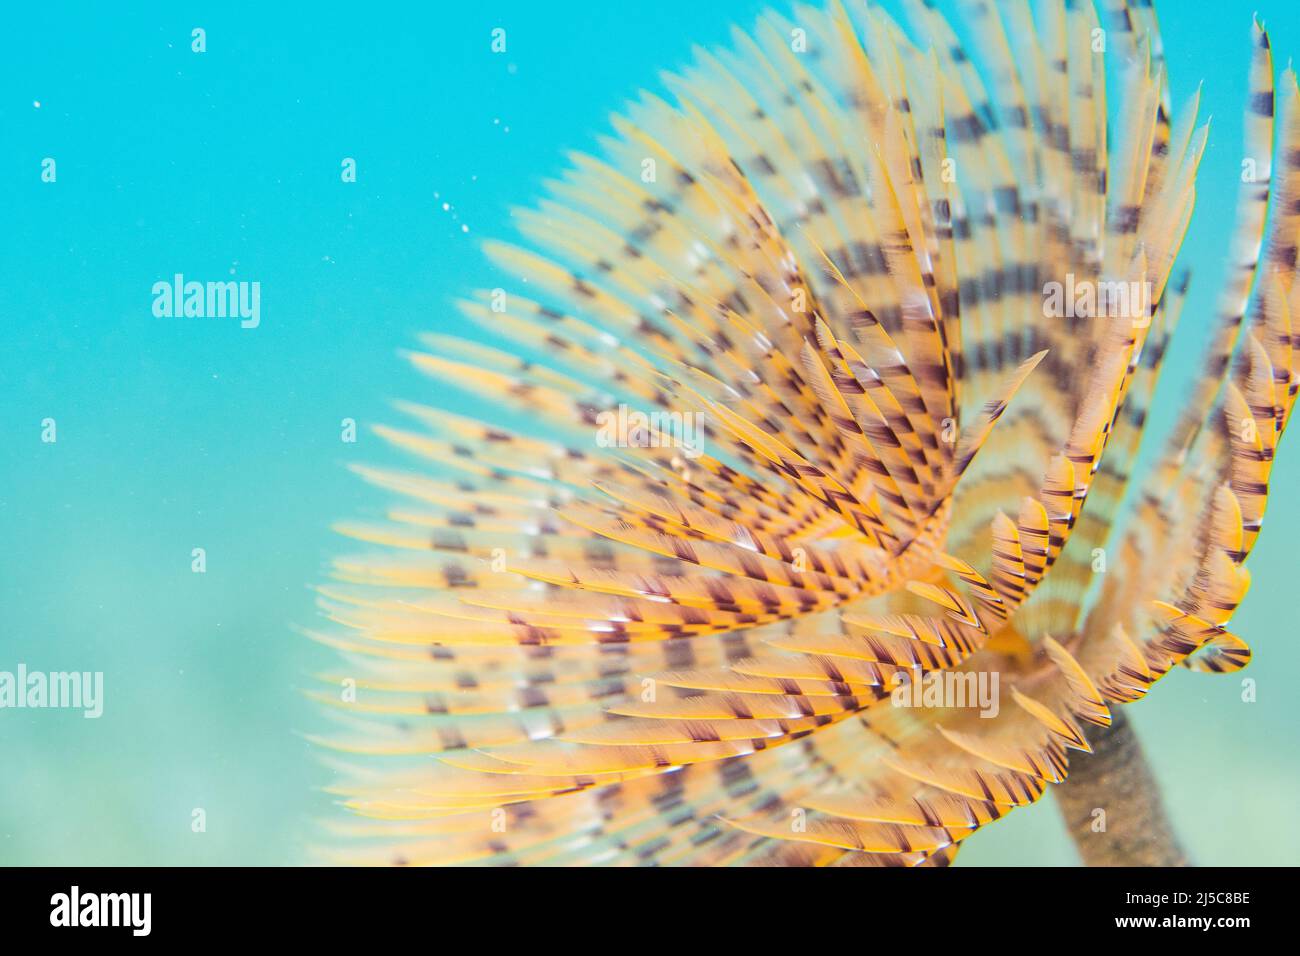 Sabella spallanzanii is a species of marine polychaete worms. Names include the Mediterranean fanworm, the feather duster worm, the European fan worm. Stock Photo